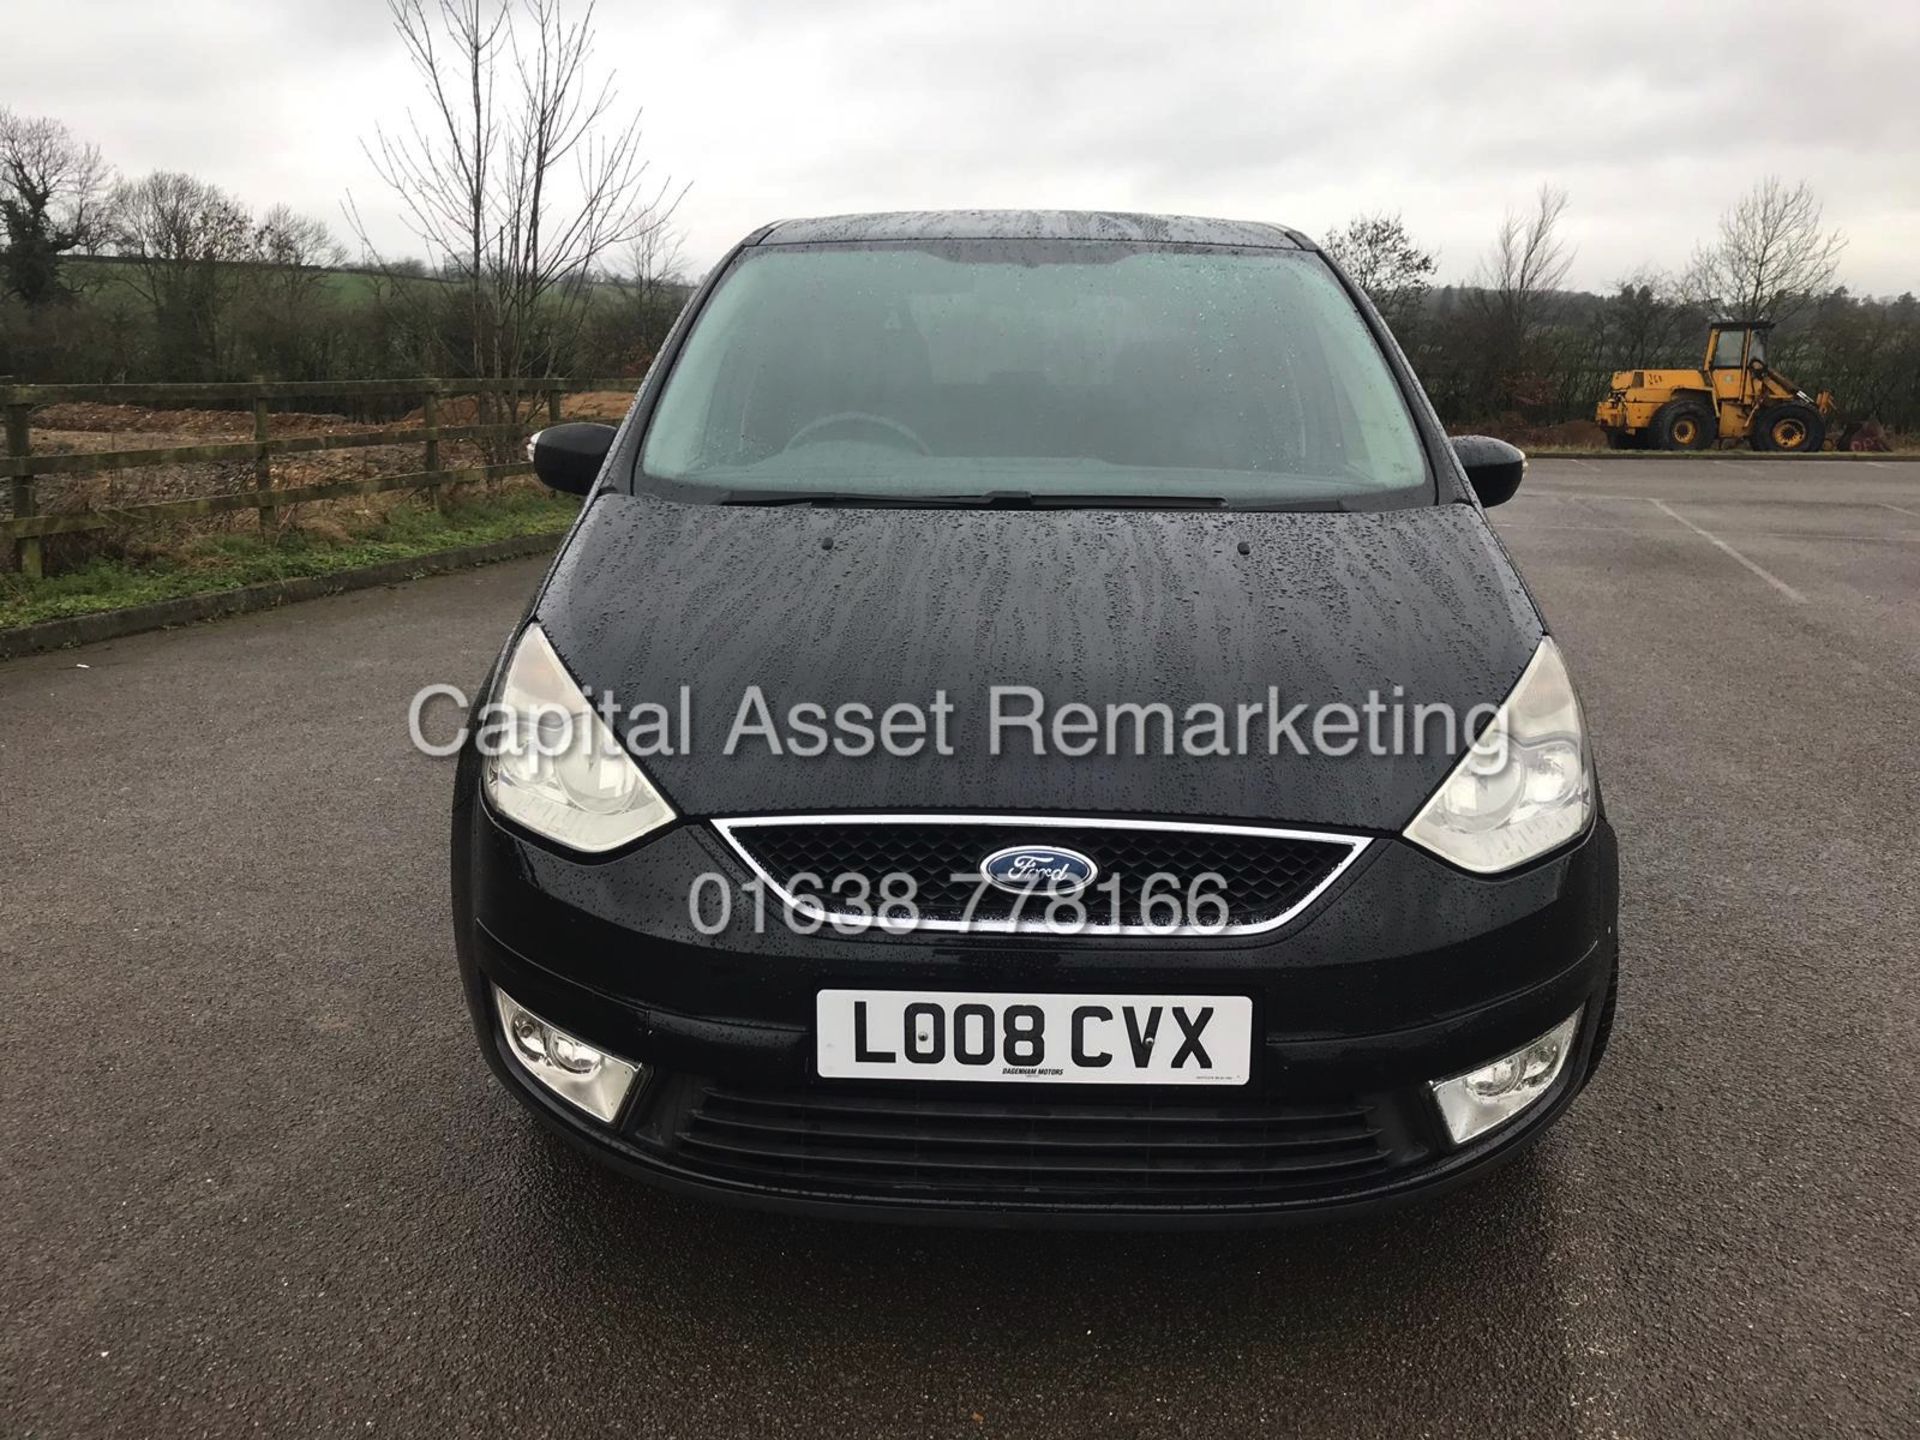 (ON SALE) FORD GALAXY 2.0TDCI "EDGE" 7 SEATER - 08 REG - AIR CON - 1 PREVIOUS OWNER - BLACK - Image 3 of 14